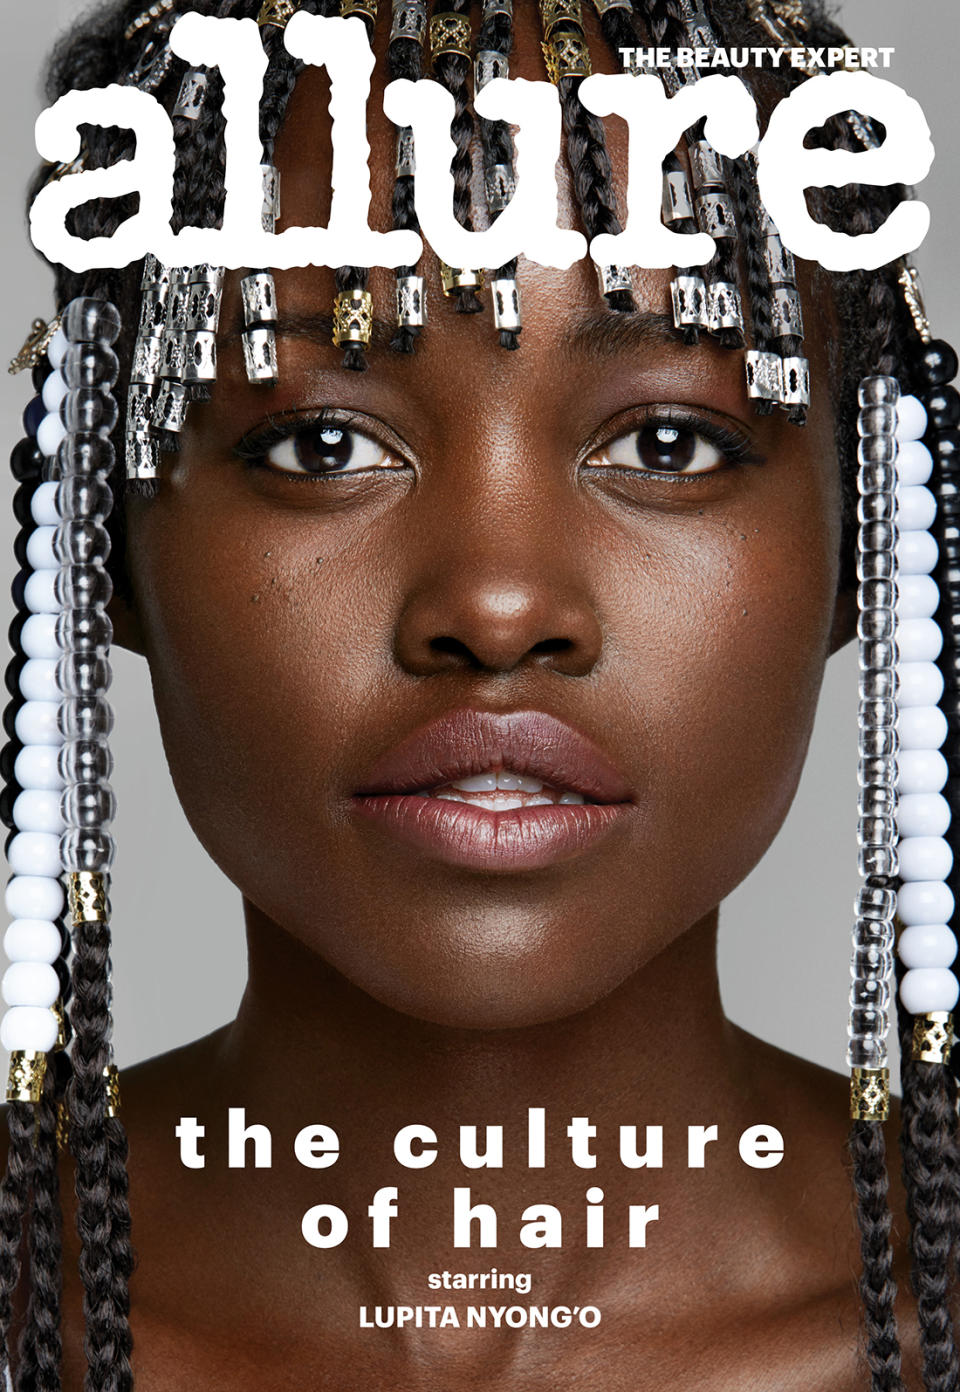 Braids and beads. Lupita Nyong'o dons a beautiful braided 'do on the cover of Allure. (Photo: Patrick Demarchelier for Allure)